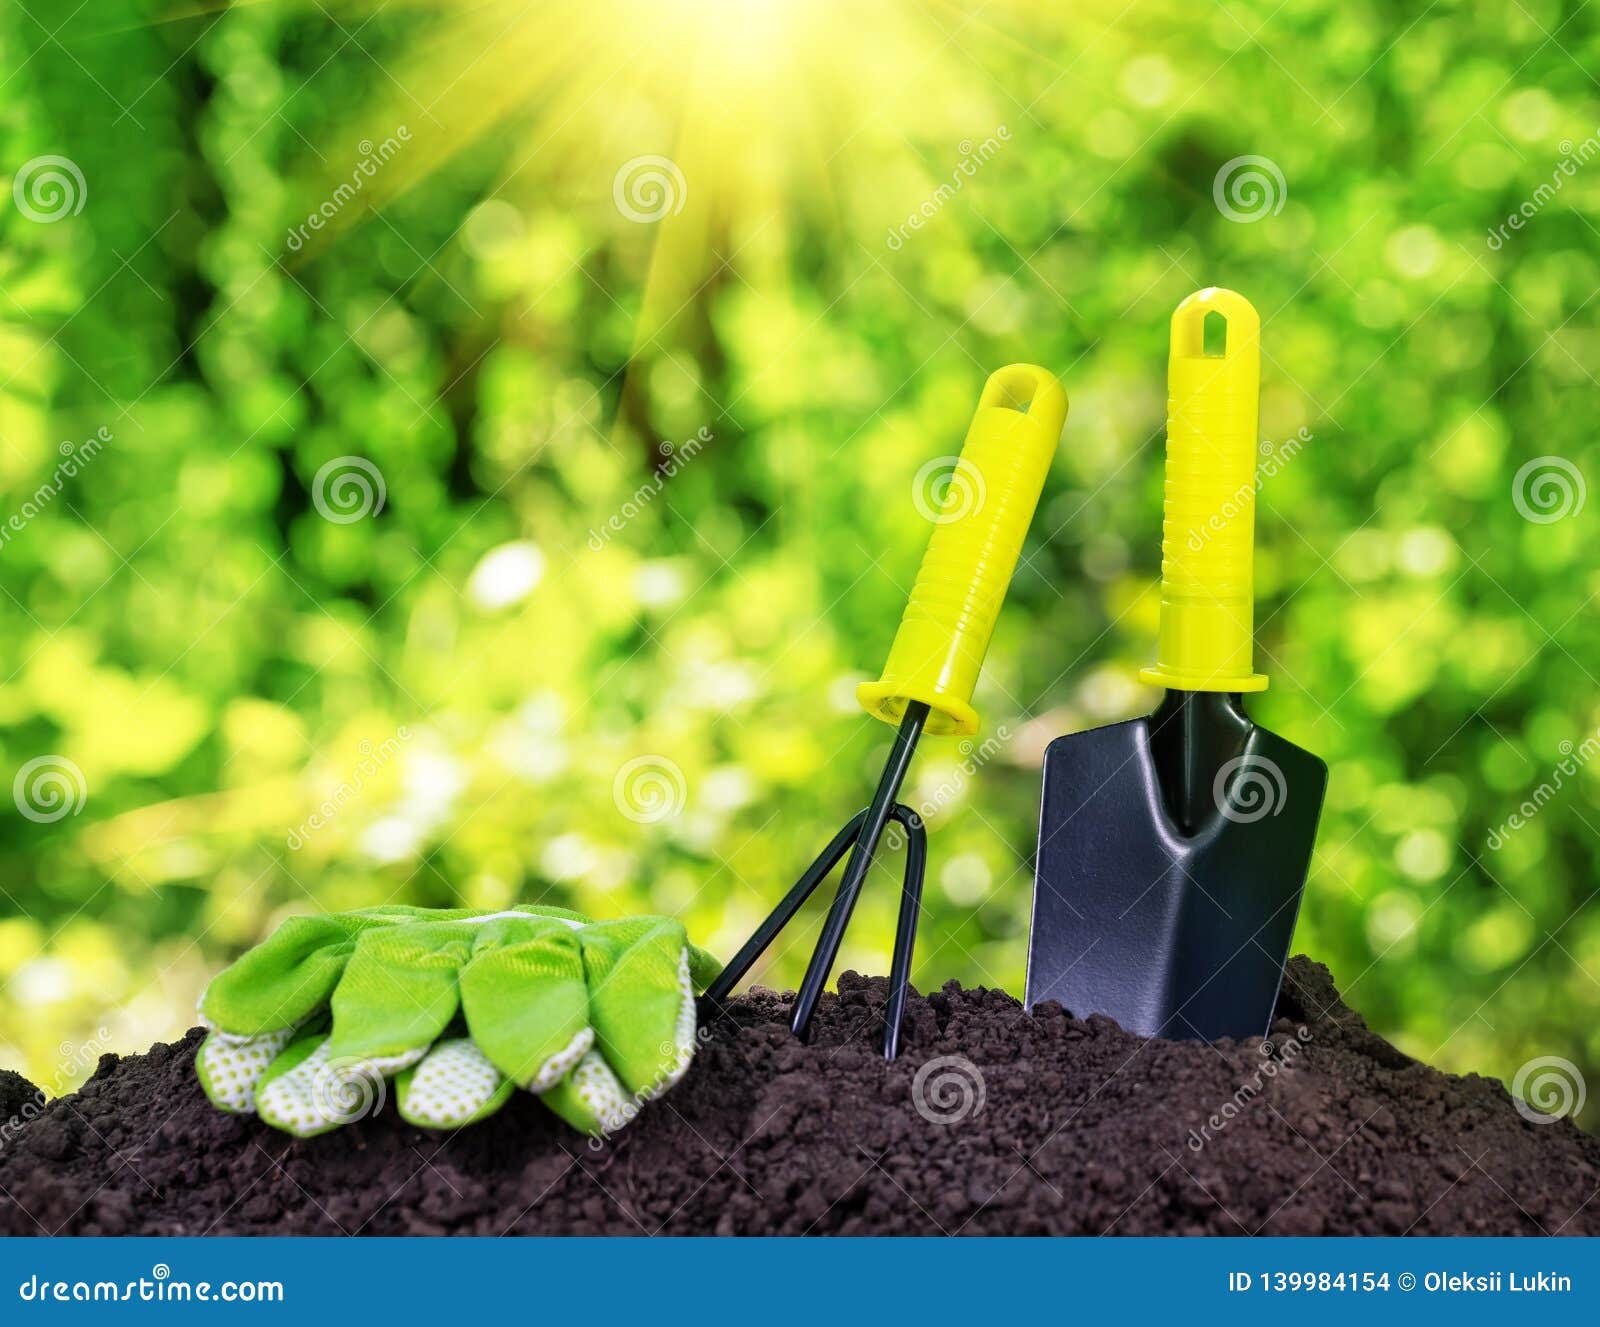 Garden Tools Rake Trowel and Gloves on Pile of Soil Stock Photo - Image ...